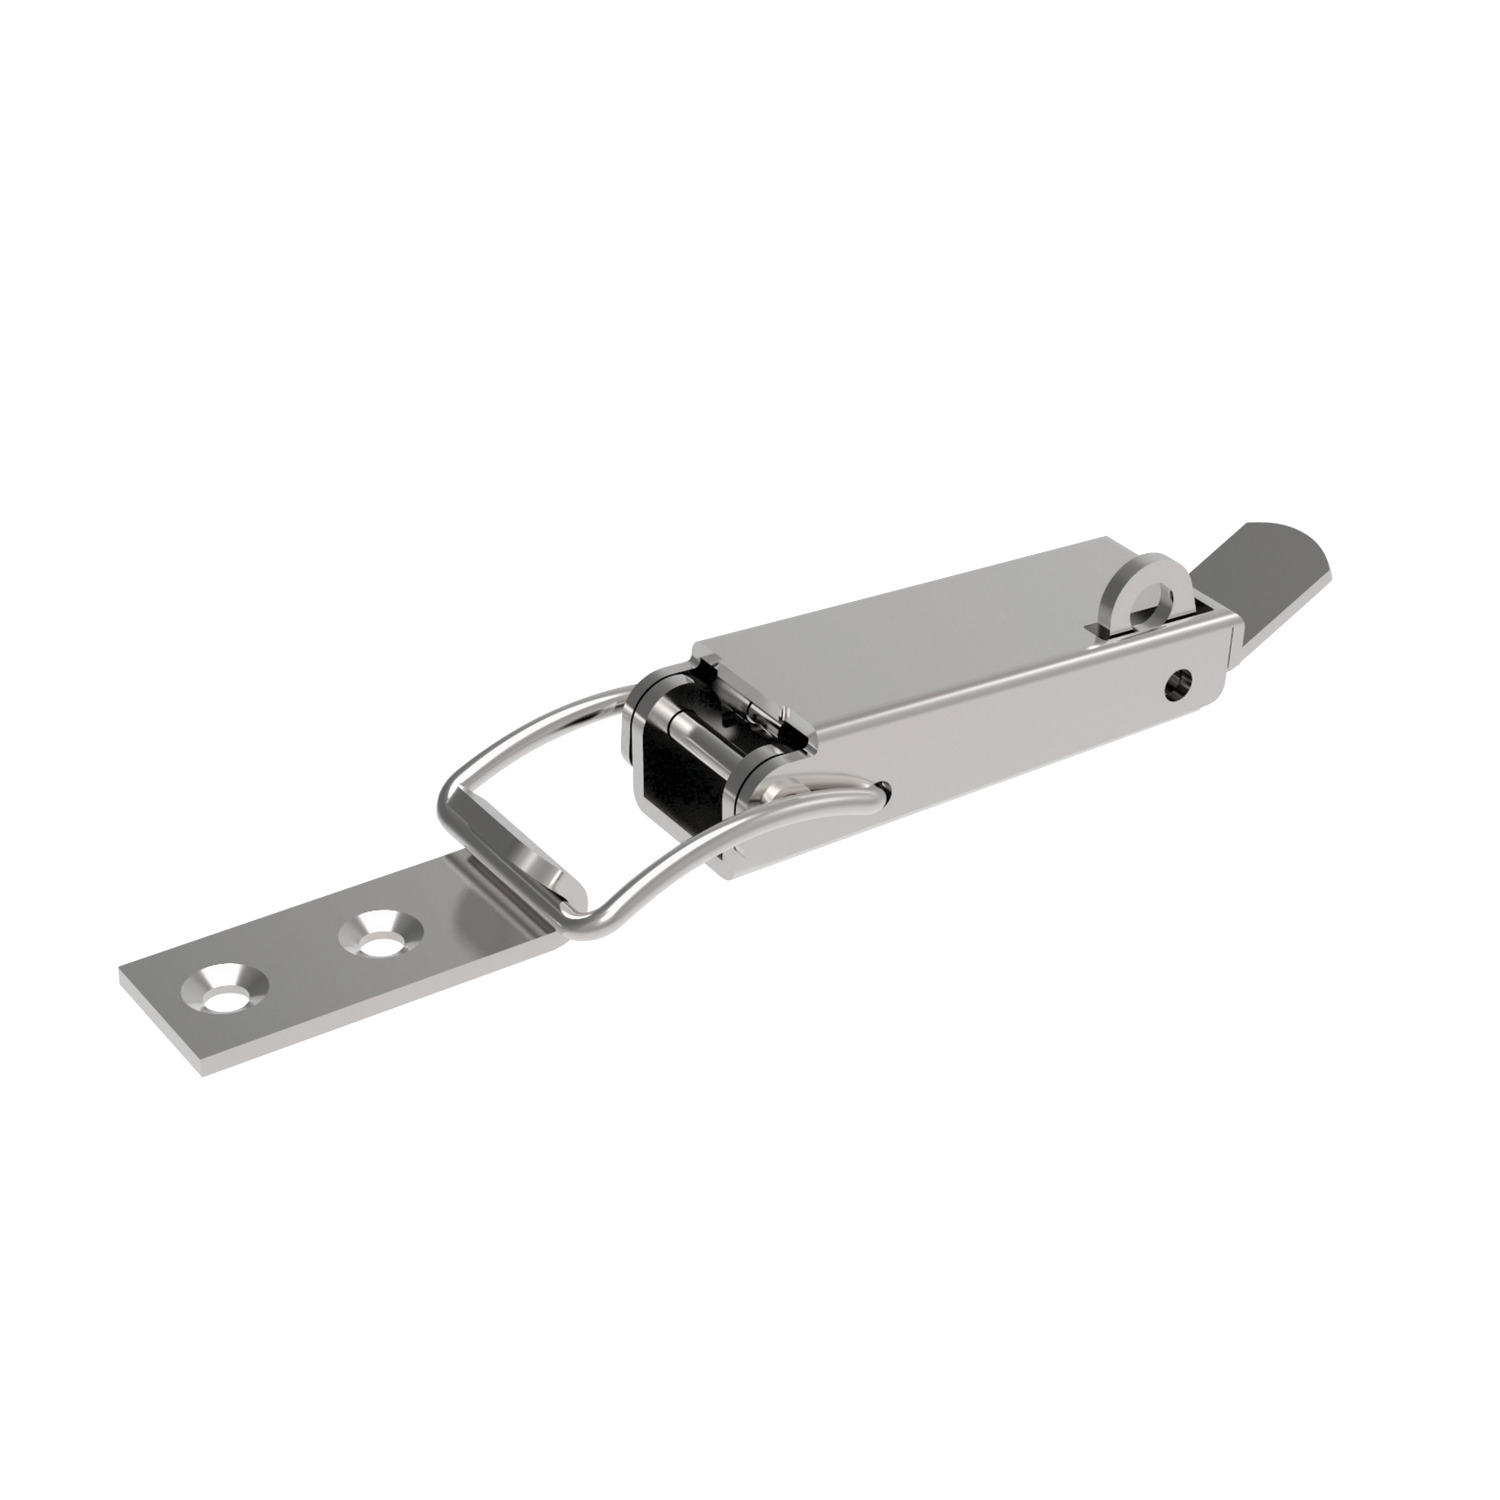 J0460.AC0004 Toggle Latches Zinc Plated Steel - 102 - 11 - 23